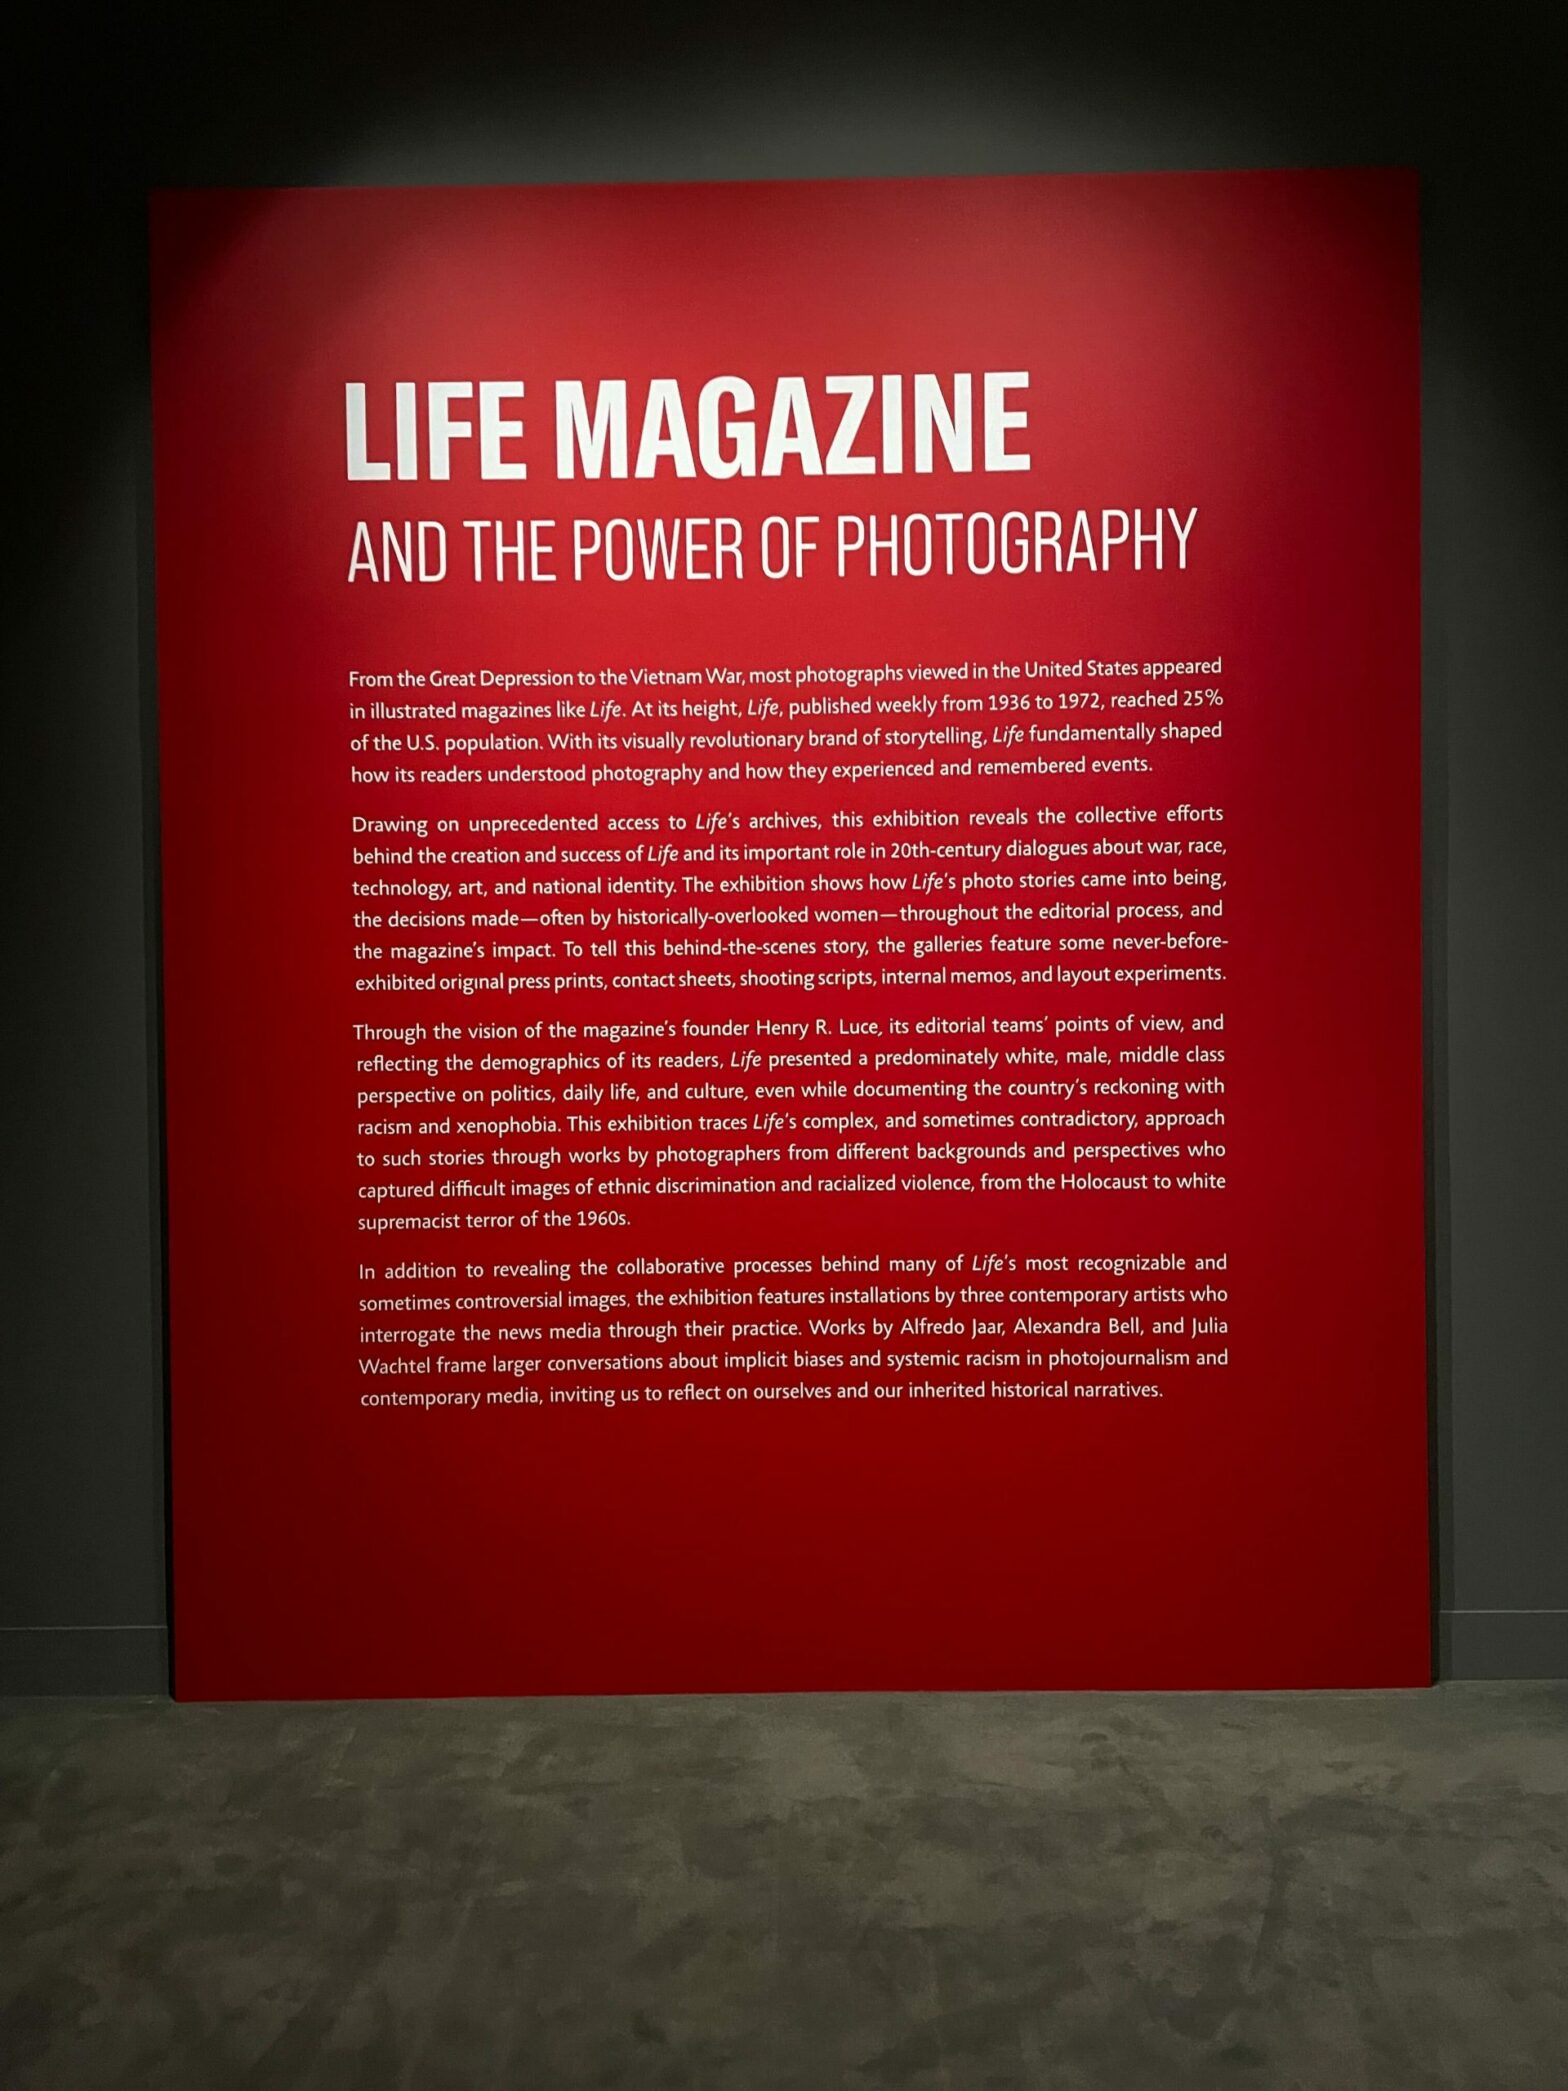 'Life Magazine and the Power of Photography' illustrates history